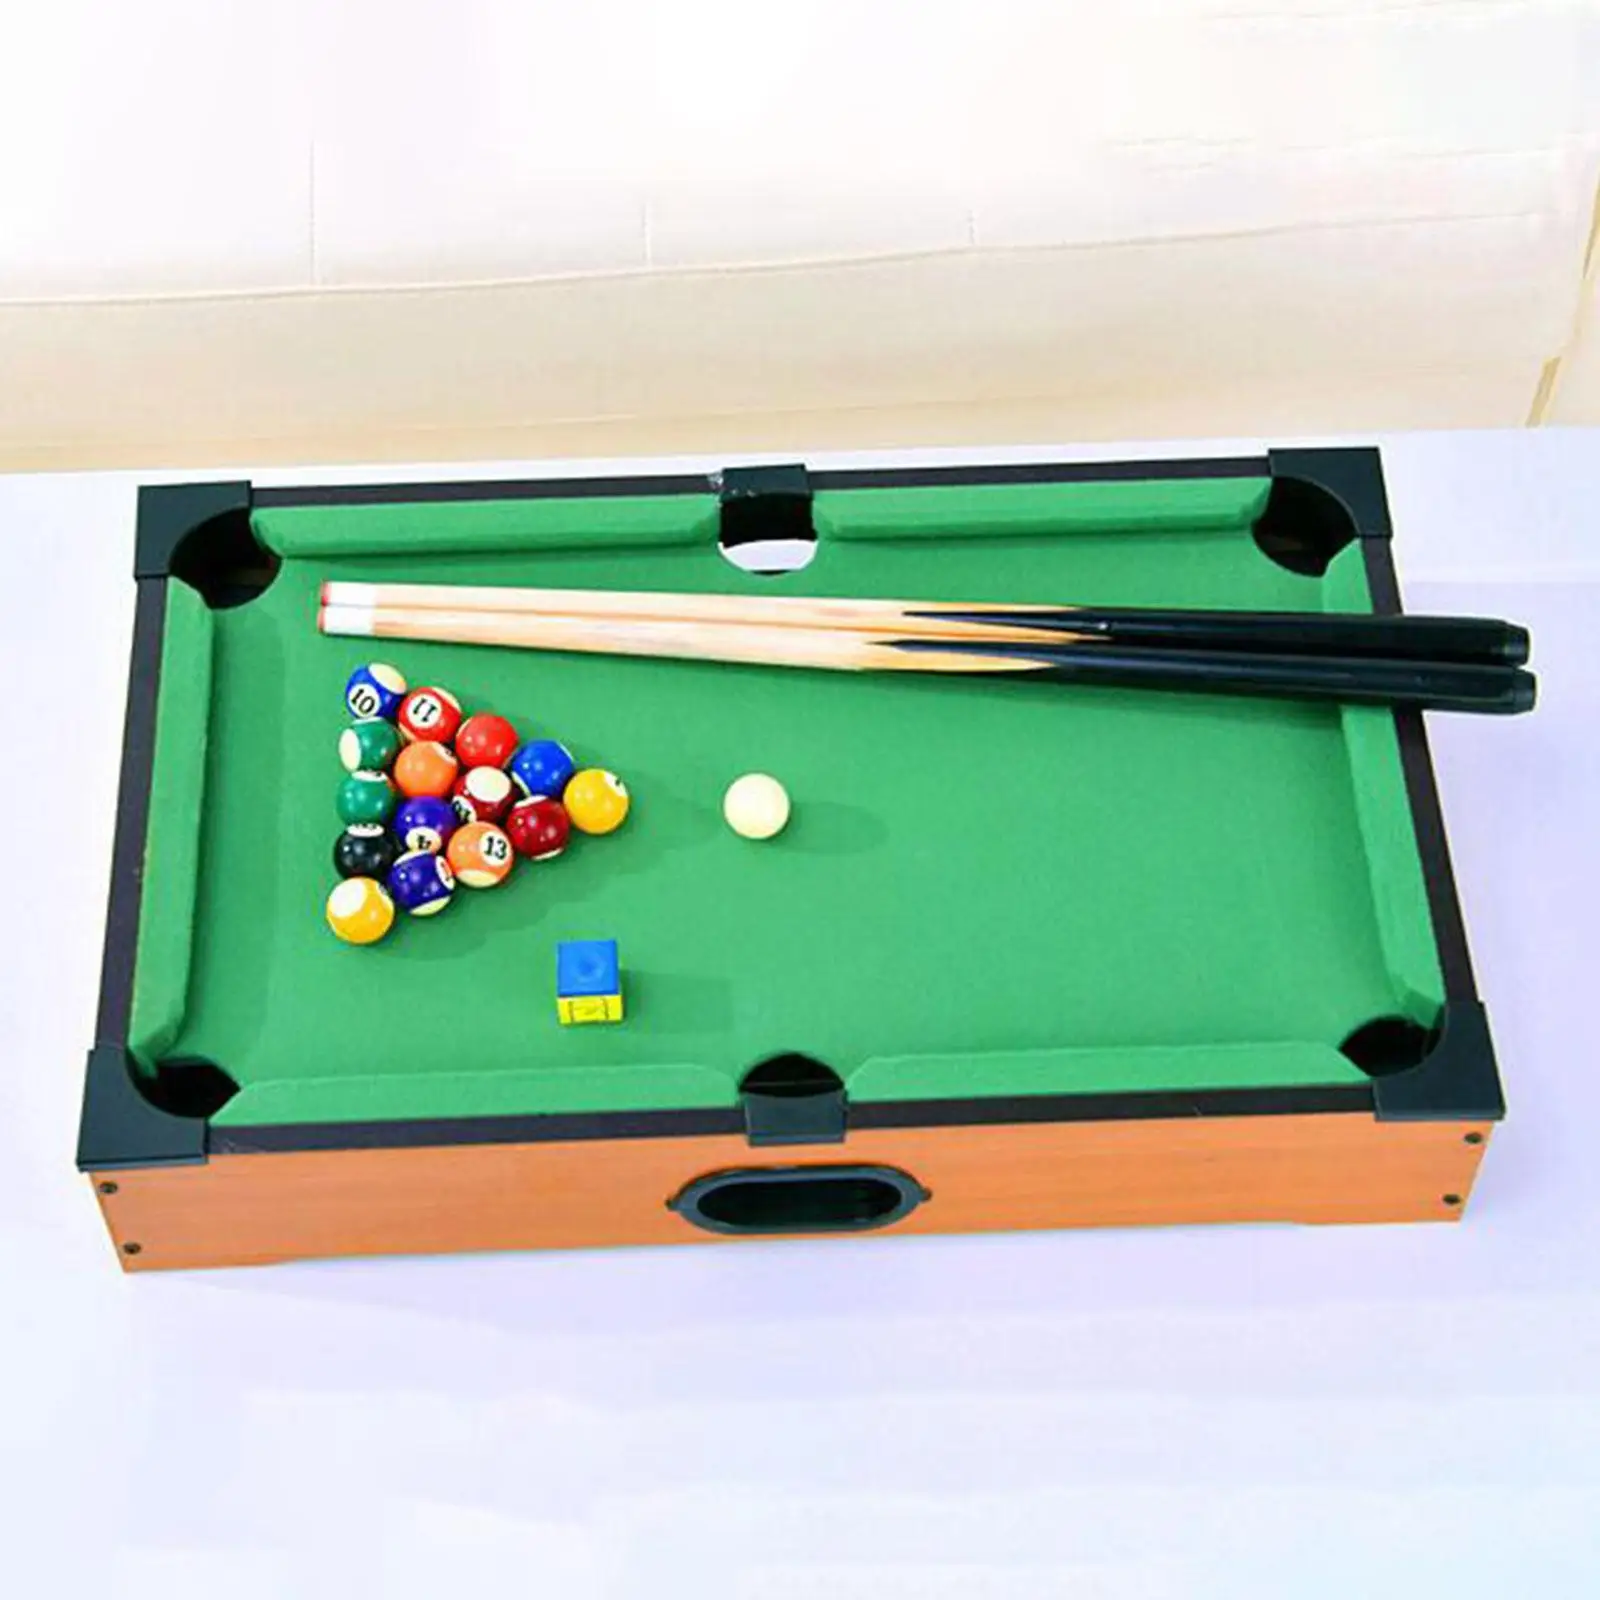 Mini Pool Table Home Play Motor Skills Billiards Toy for Playroom Party Home